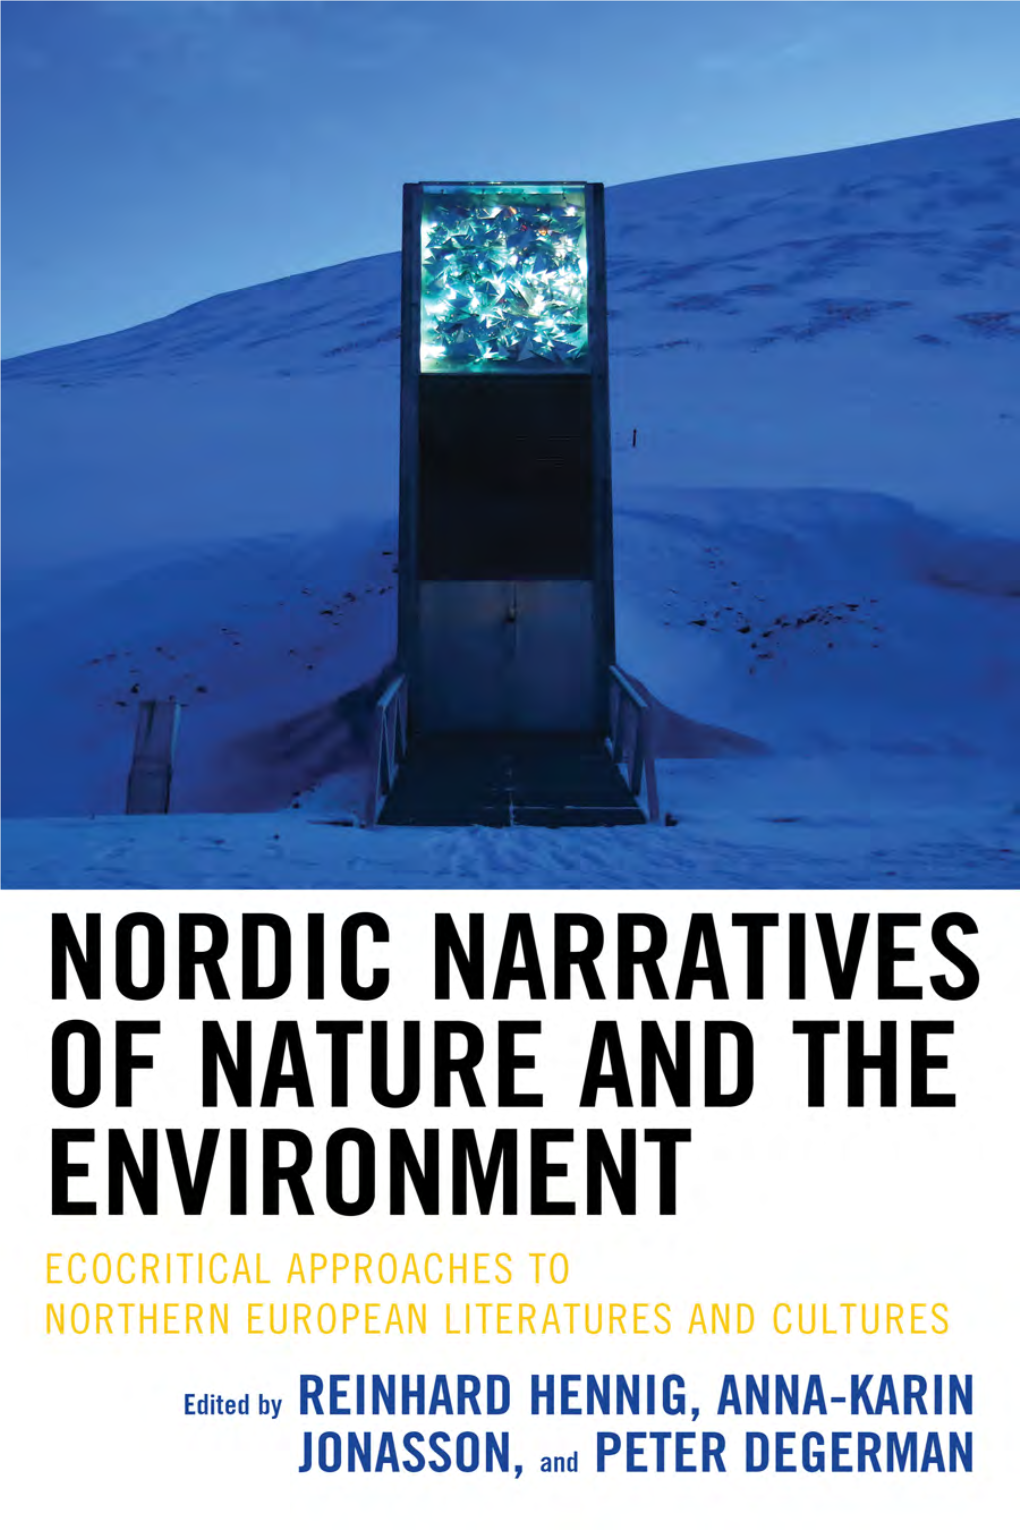 Introduction: Nordic Narratives of Nature and the Environment 1 Reinhard Hennig, Anna-Karin Jonasson, and Peter Degerman